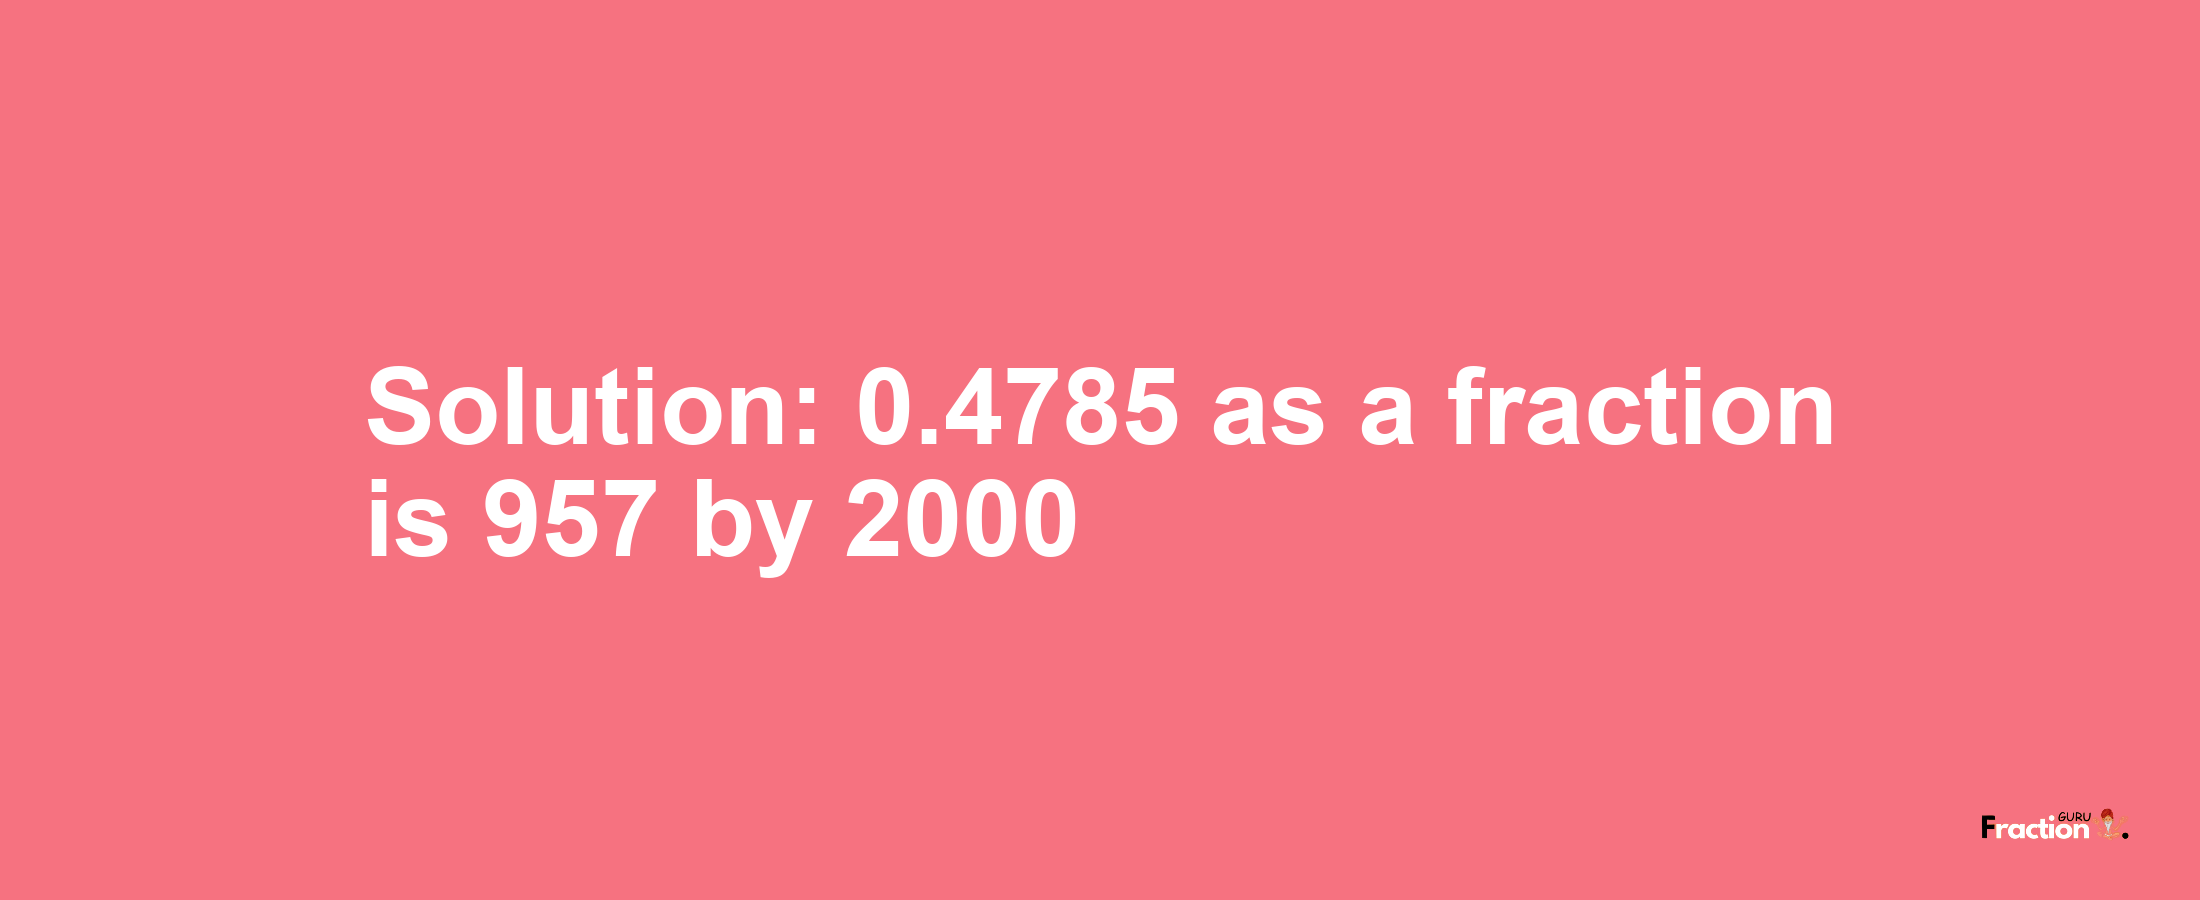 Solution:0.4785 as a fraction is 957/2000